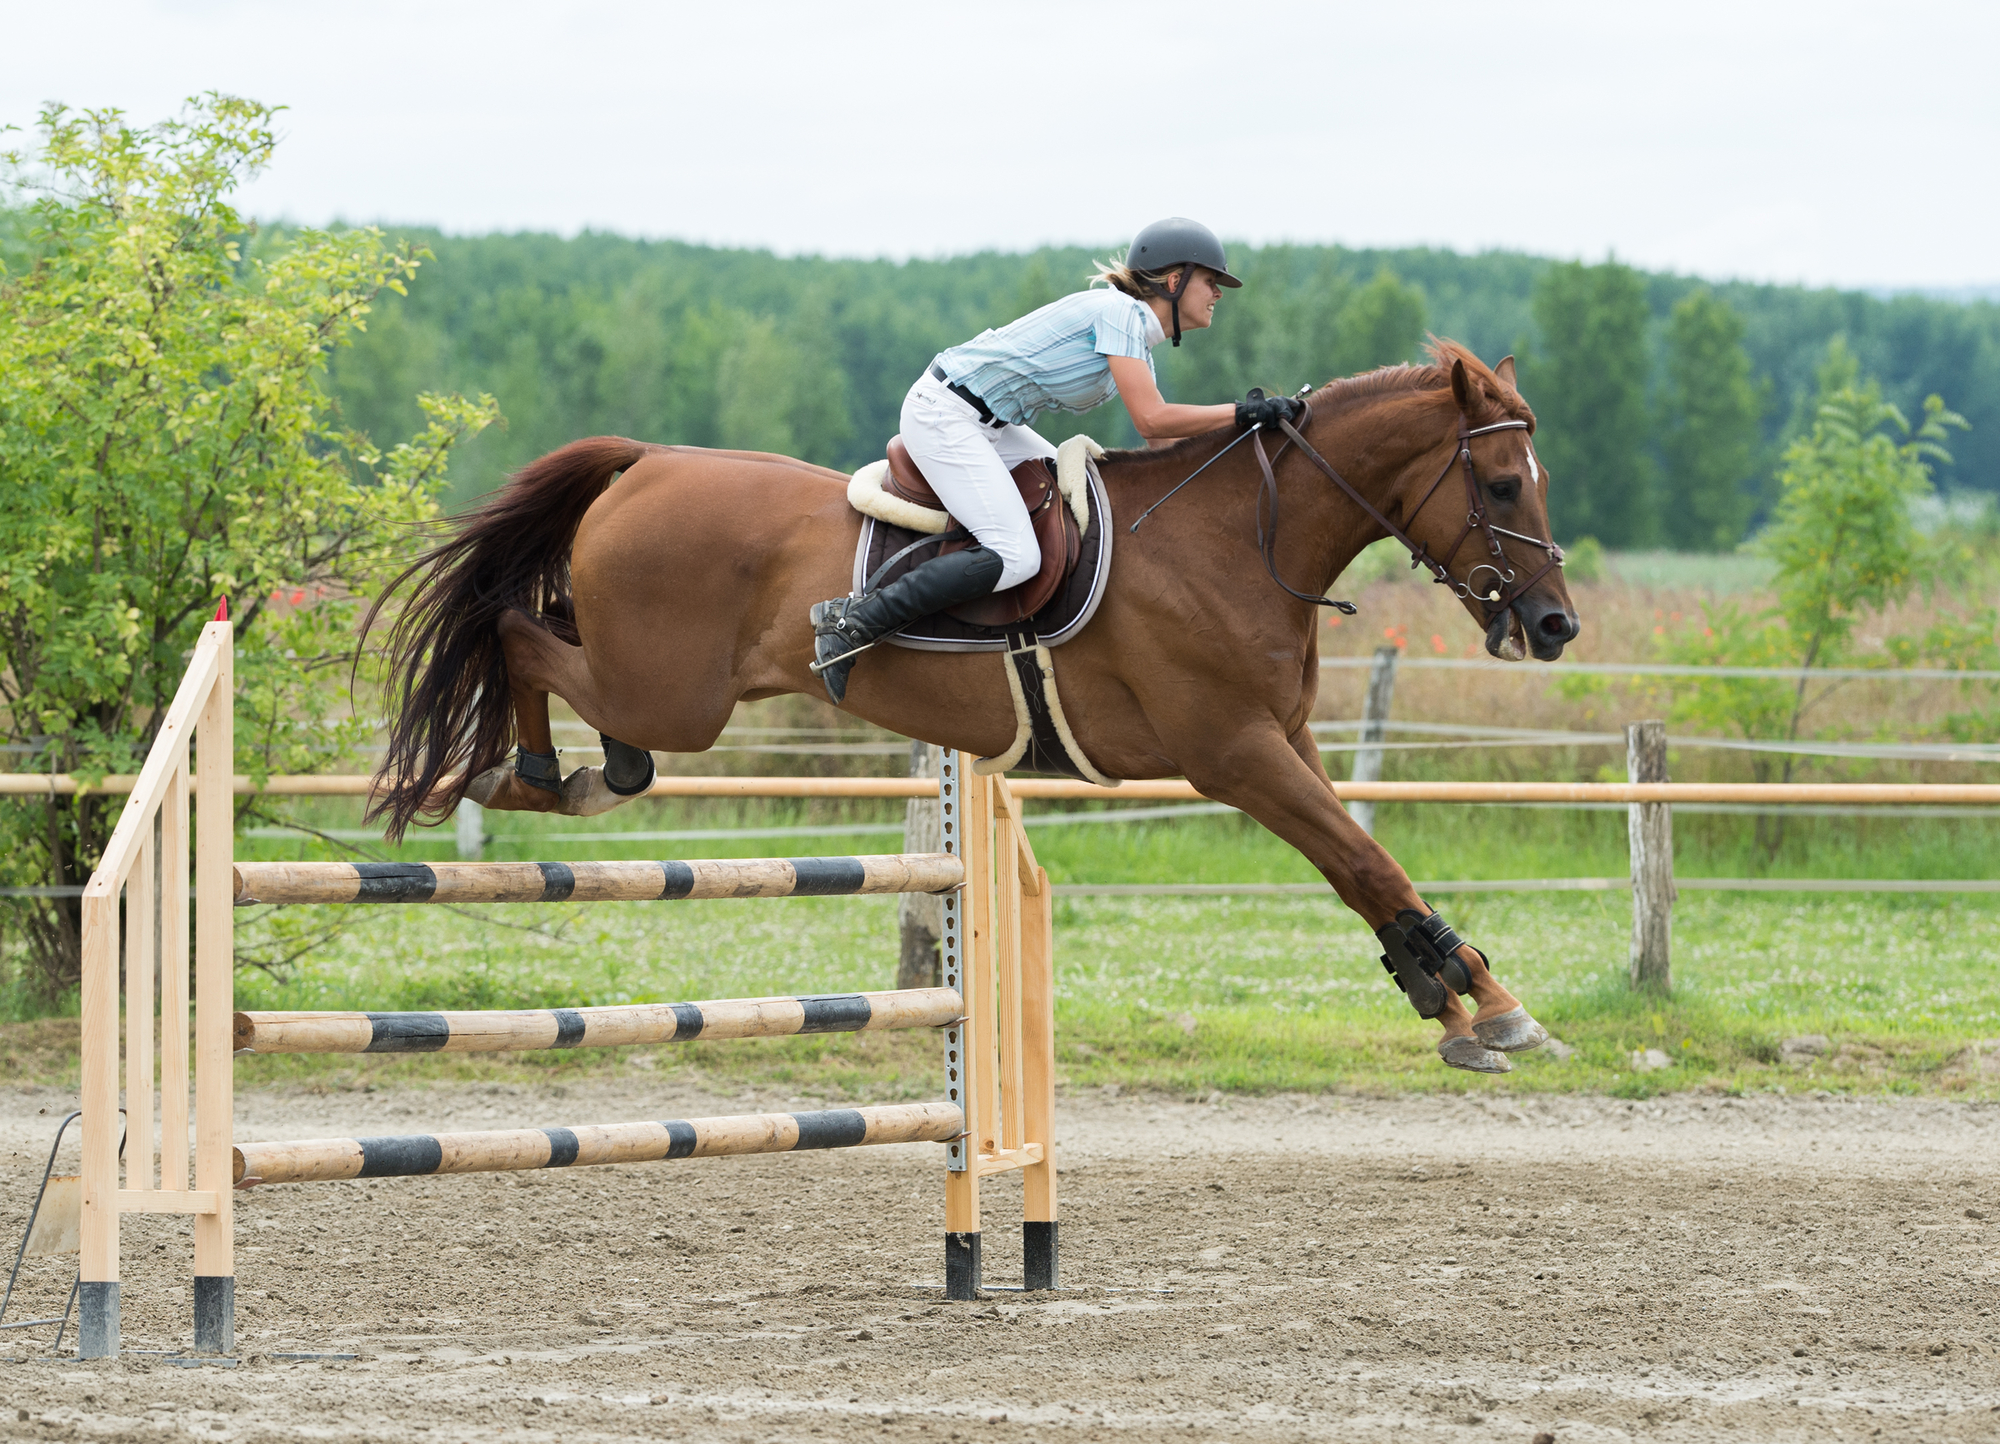 Necessary equipment for equestrian sports